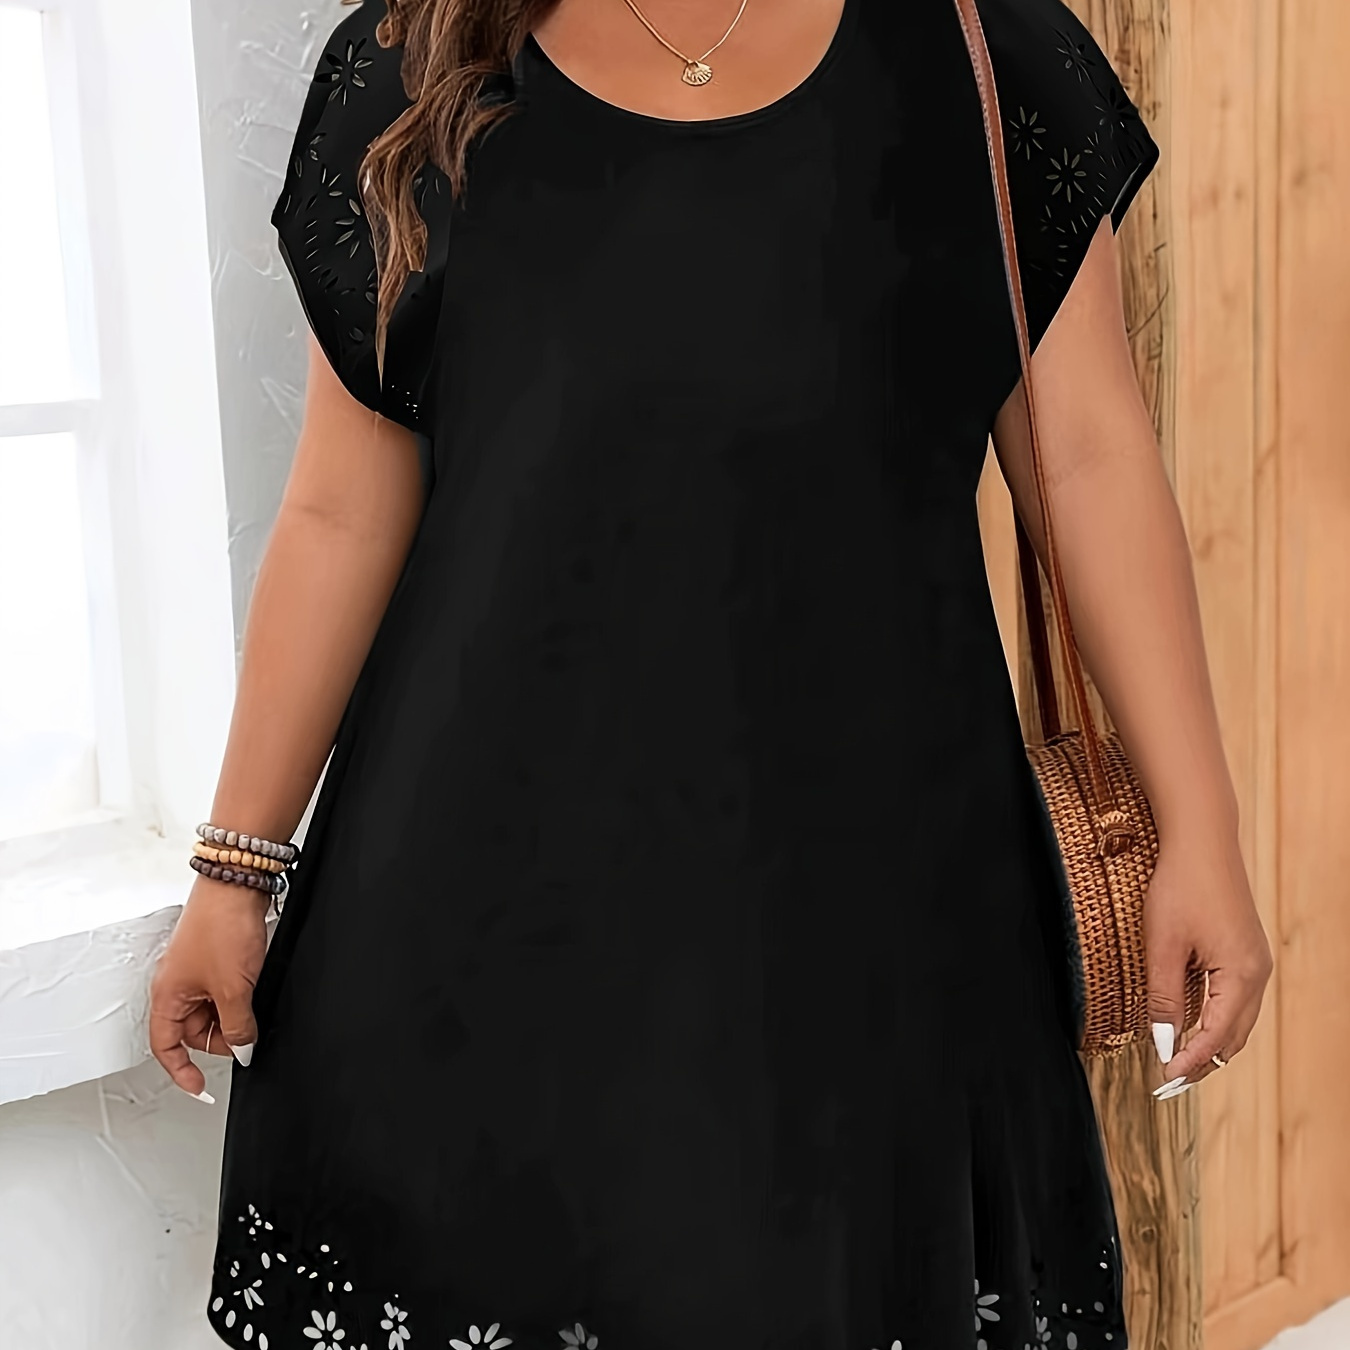 

Plus Size Solid Crew Neck Dress, Elegant Floral Cut Out Batwing Sleeve Dress For Spring & Summer, Women's Plus Size Clothing